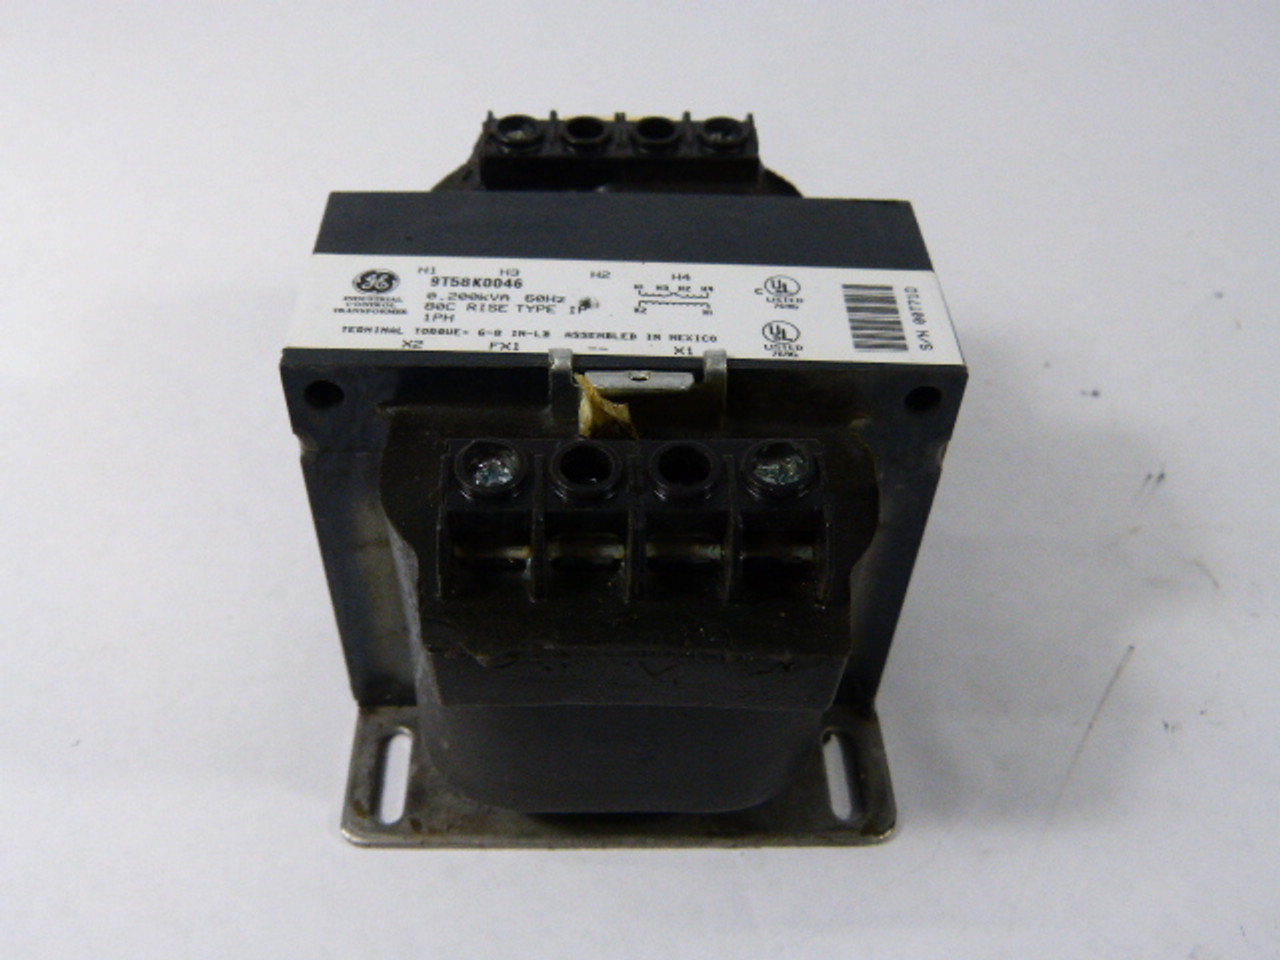 General Electric 9T58K0046 Industrial Control Transformer USED